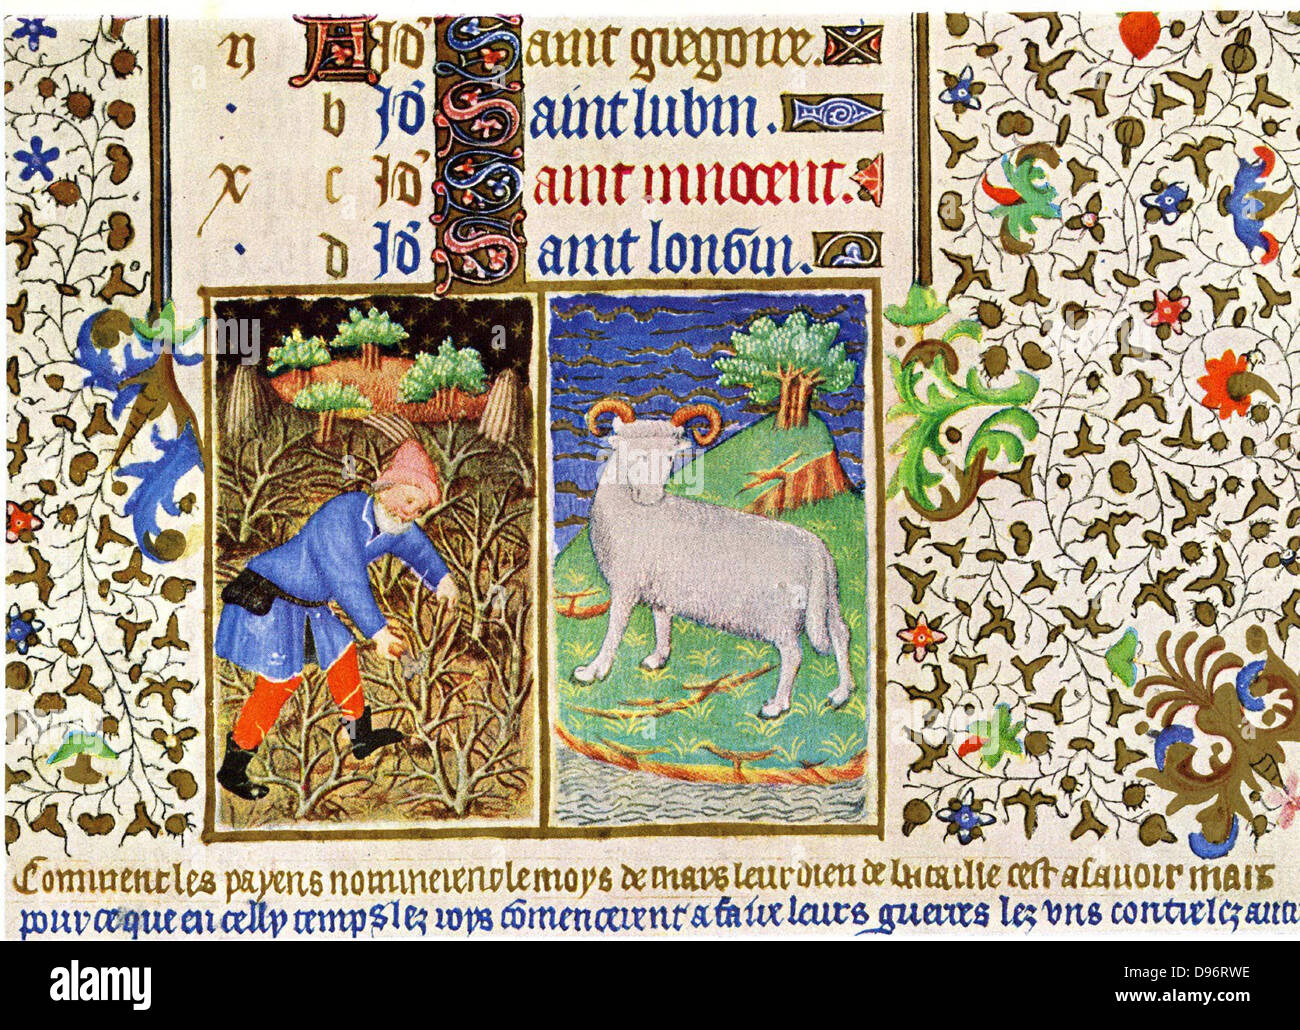 March. Astrological sign of Aries. Pruning. From the 'Bedford Hours', French 15th century illuminated manuscript. British Library, London. Stock Photo